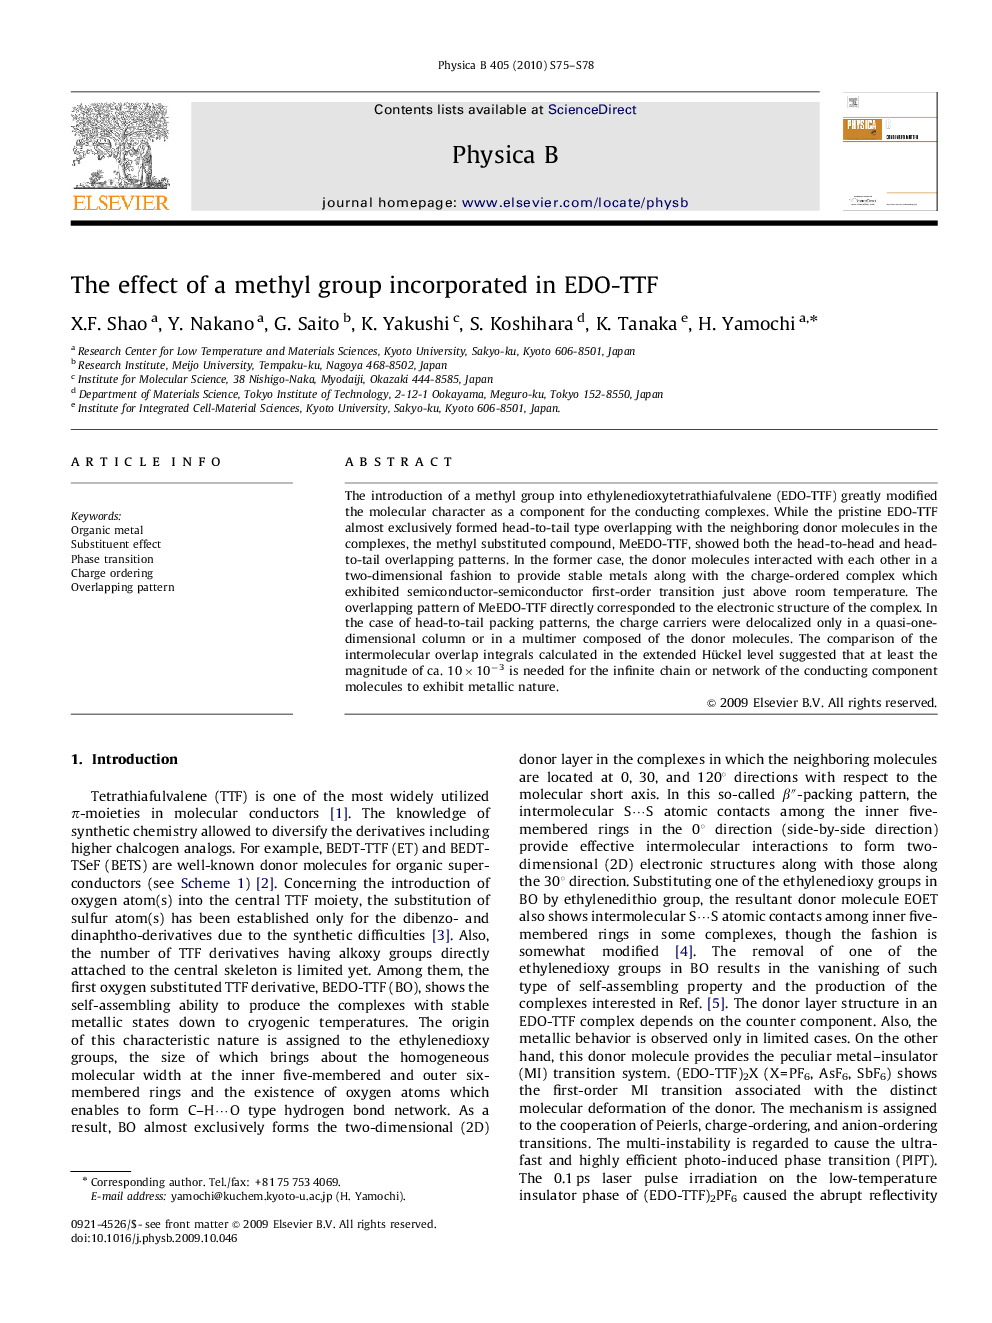 The effect of a methyl group incorporated in EDO-TTF